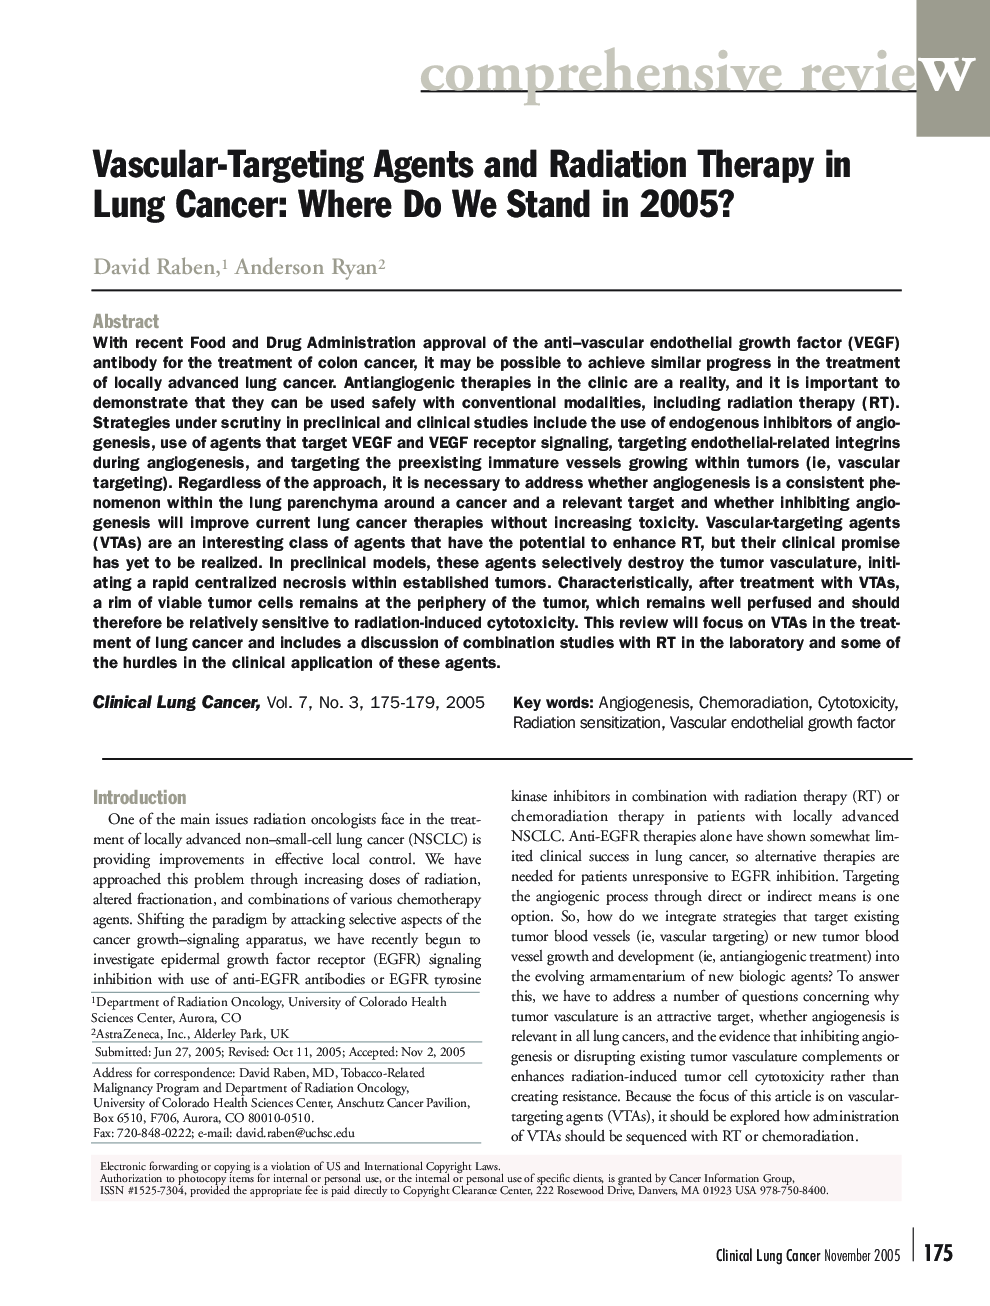 Vascular-Targeting Agents and Radiation Therapy in Lung Cancer: Where Do We Stand in 2005?